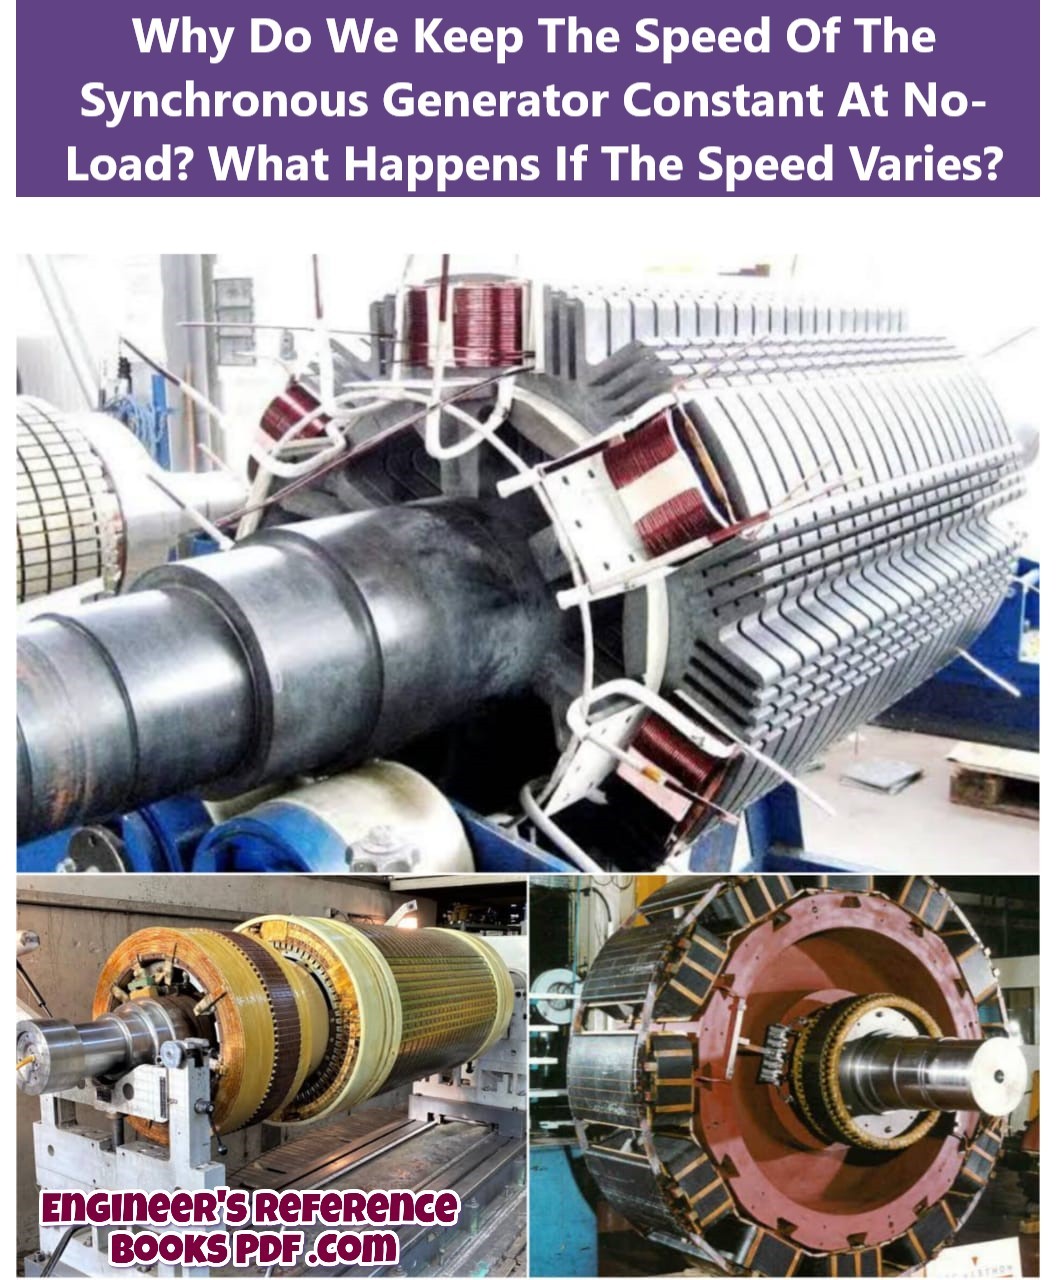 Why Do We Keep The Speed Of The Synchronous Generator Constant At No-Load? What Happens If The Speed Varies?
